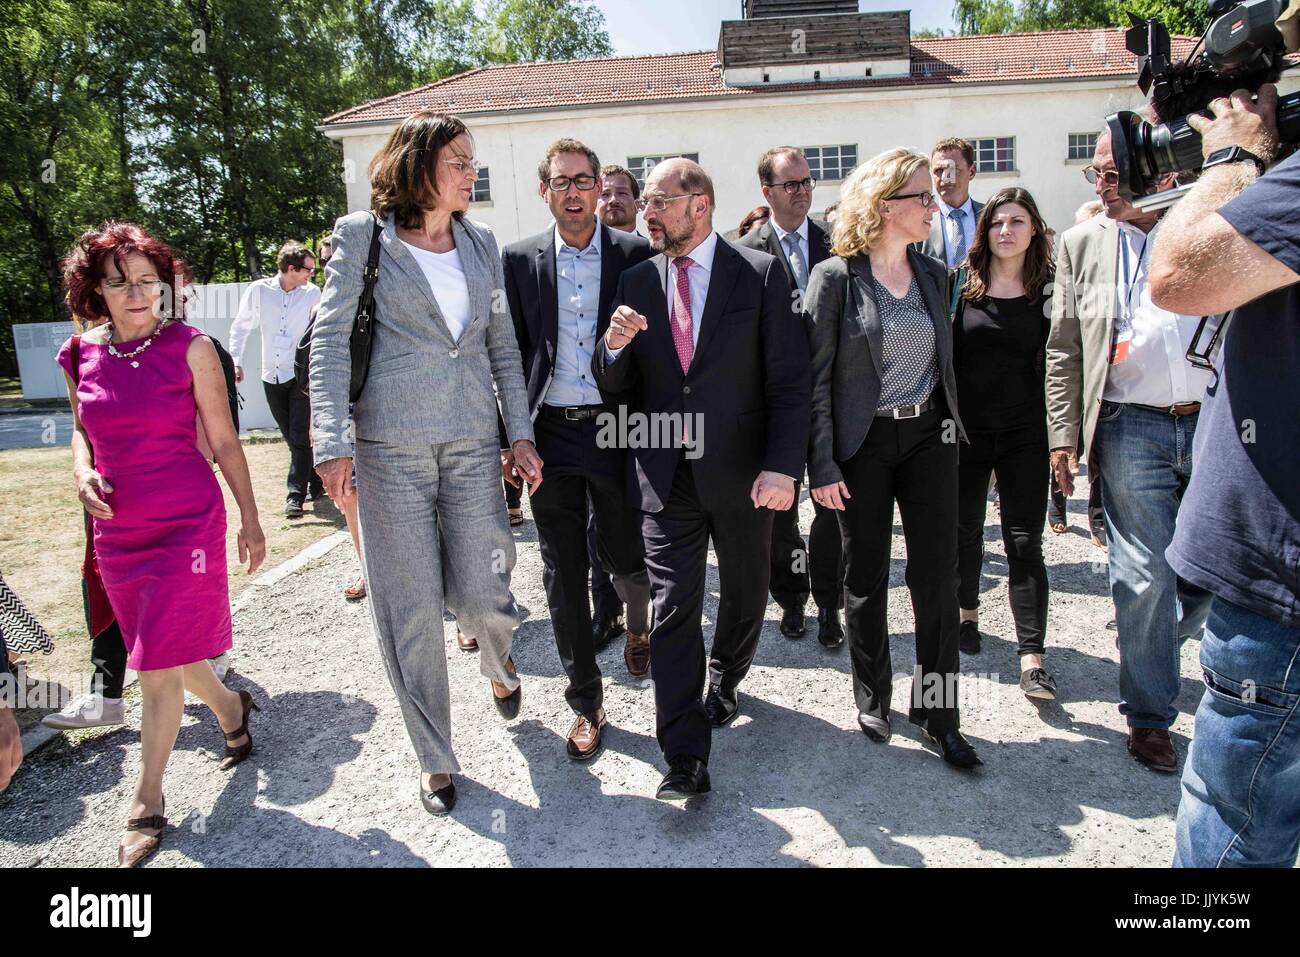 July 21, 2017 - Dachau, bavaria, germany - Dr. Gabrielle Hannemann speaking to Martin Schulz. (photo: Sachelle Babbar) The head of the SPD and Kanzlerkandidat (candidate for the Chancellorship of Germany) visited the Dachau concentration camp grounds in order to pay respects on behalf of his SPD party to the victims of National Sozialism. Schulz then presented a memorial plaque (followed by a moment of silence) with inscriptions honoring the victims and those who defend democracy. Credit: ZUMA Press, Inc./Alamy Live News Stock Photo